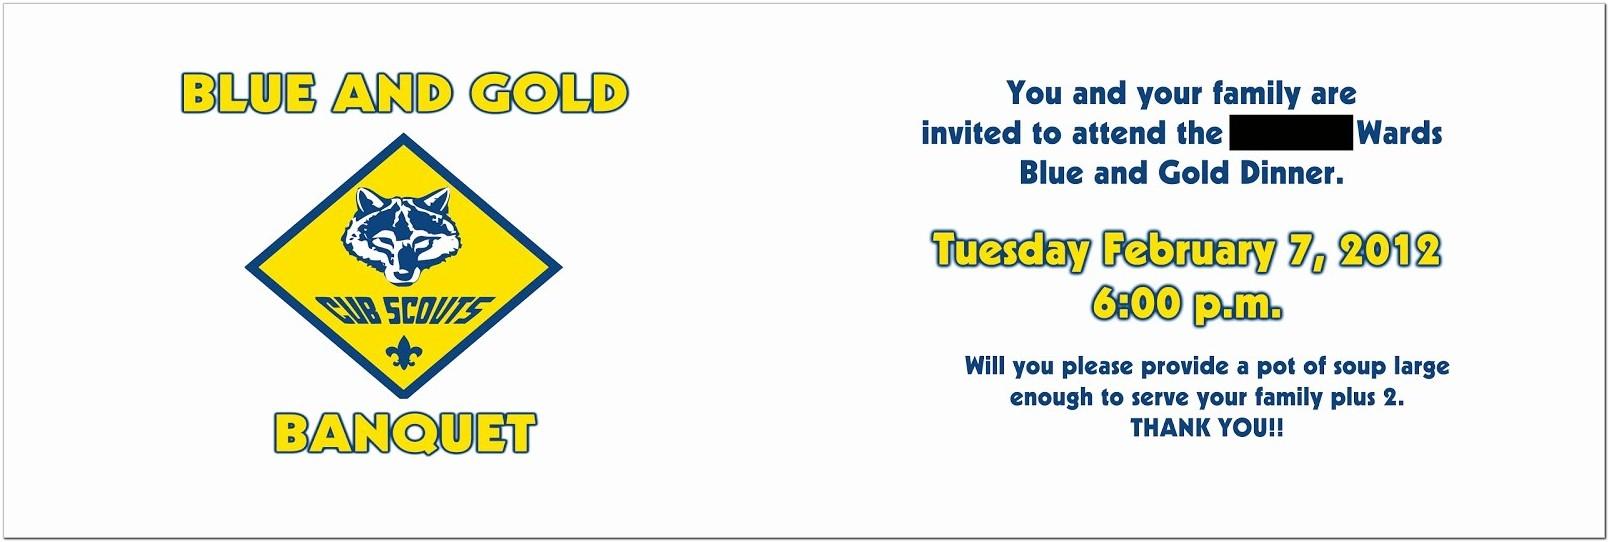 Blue And Gold Banquet Invitation Template